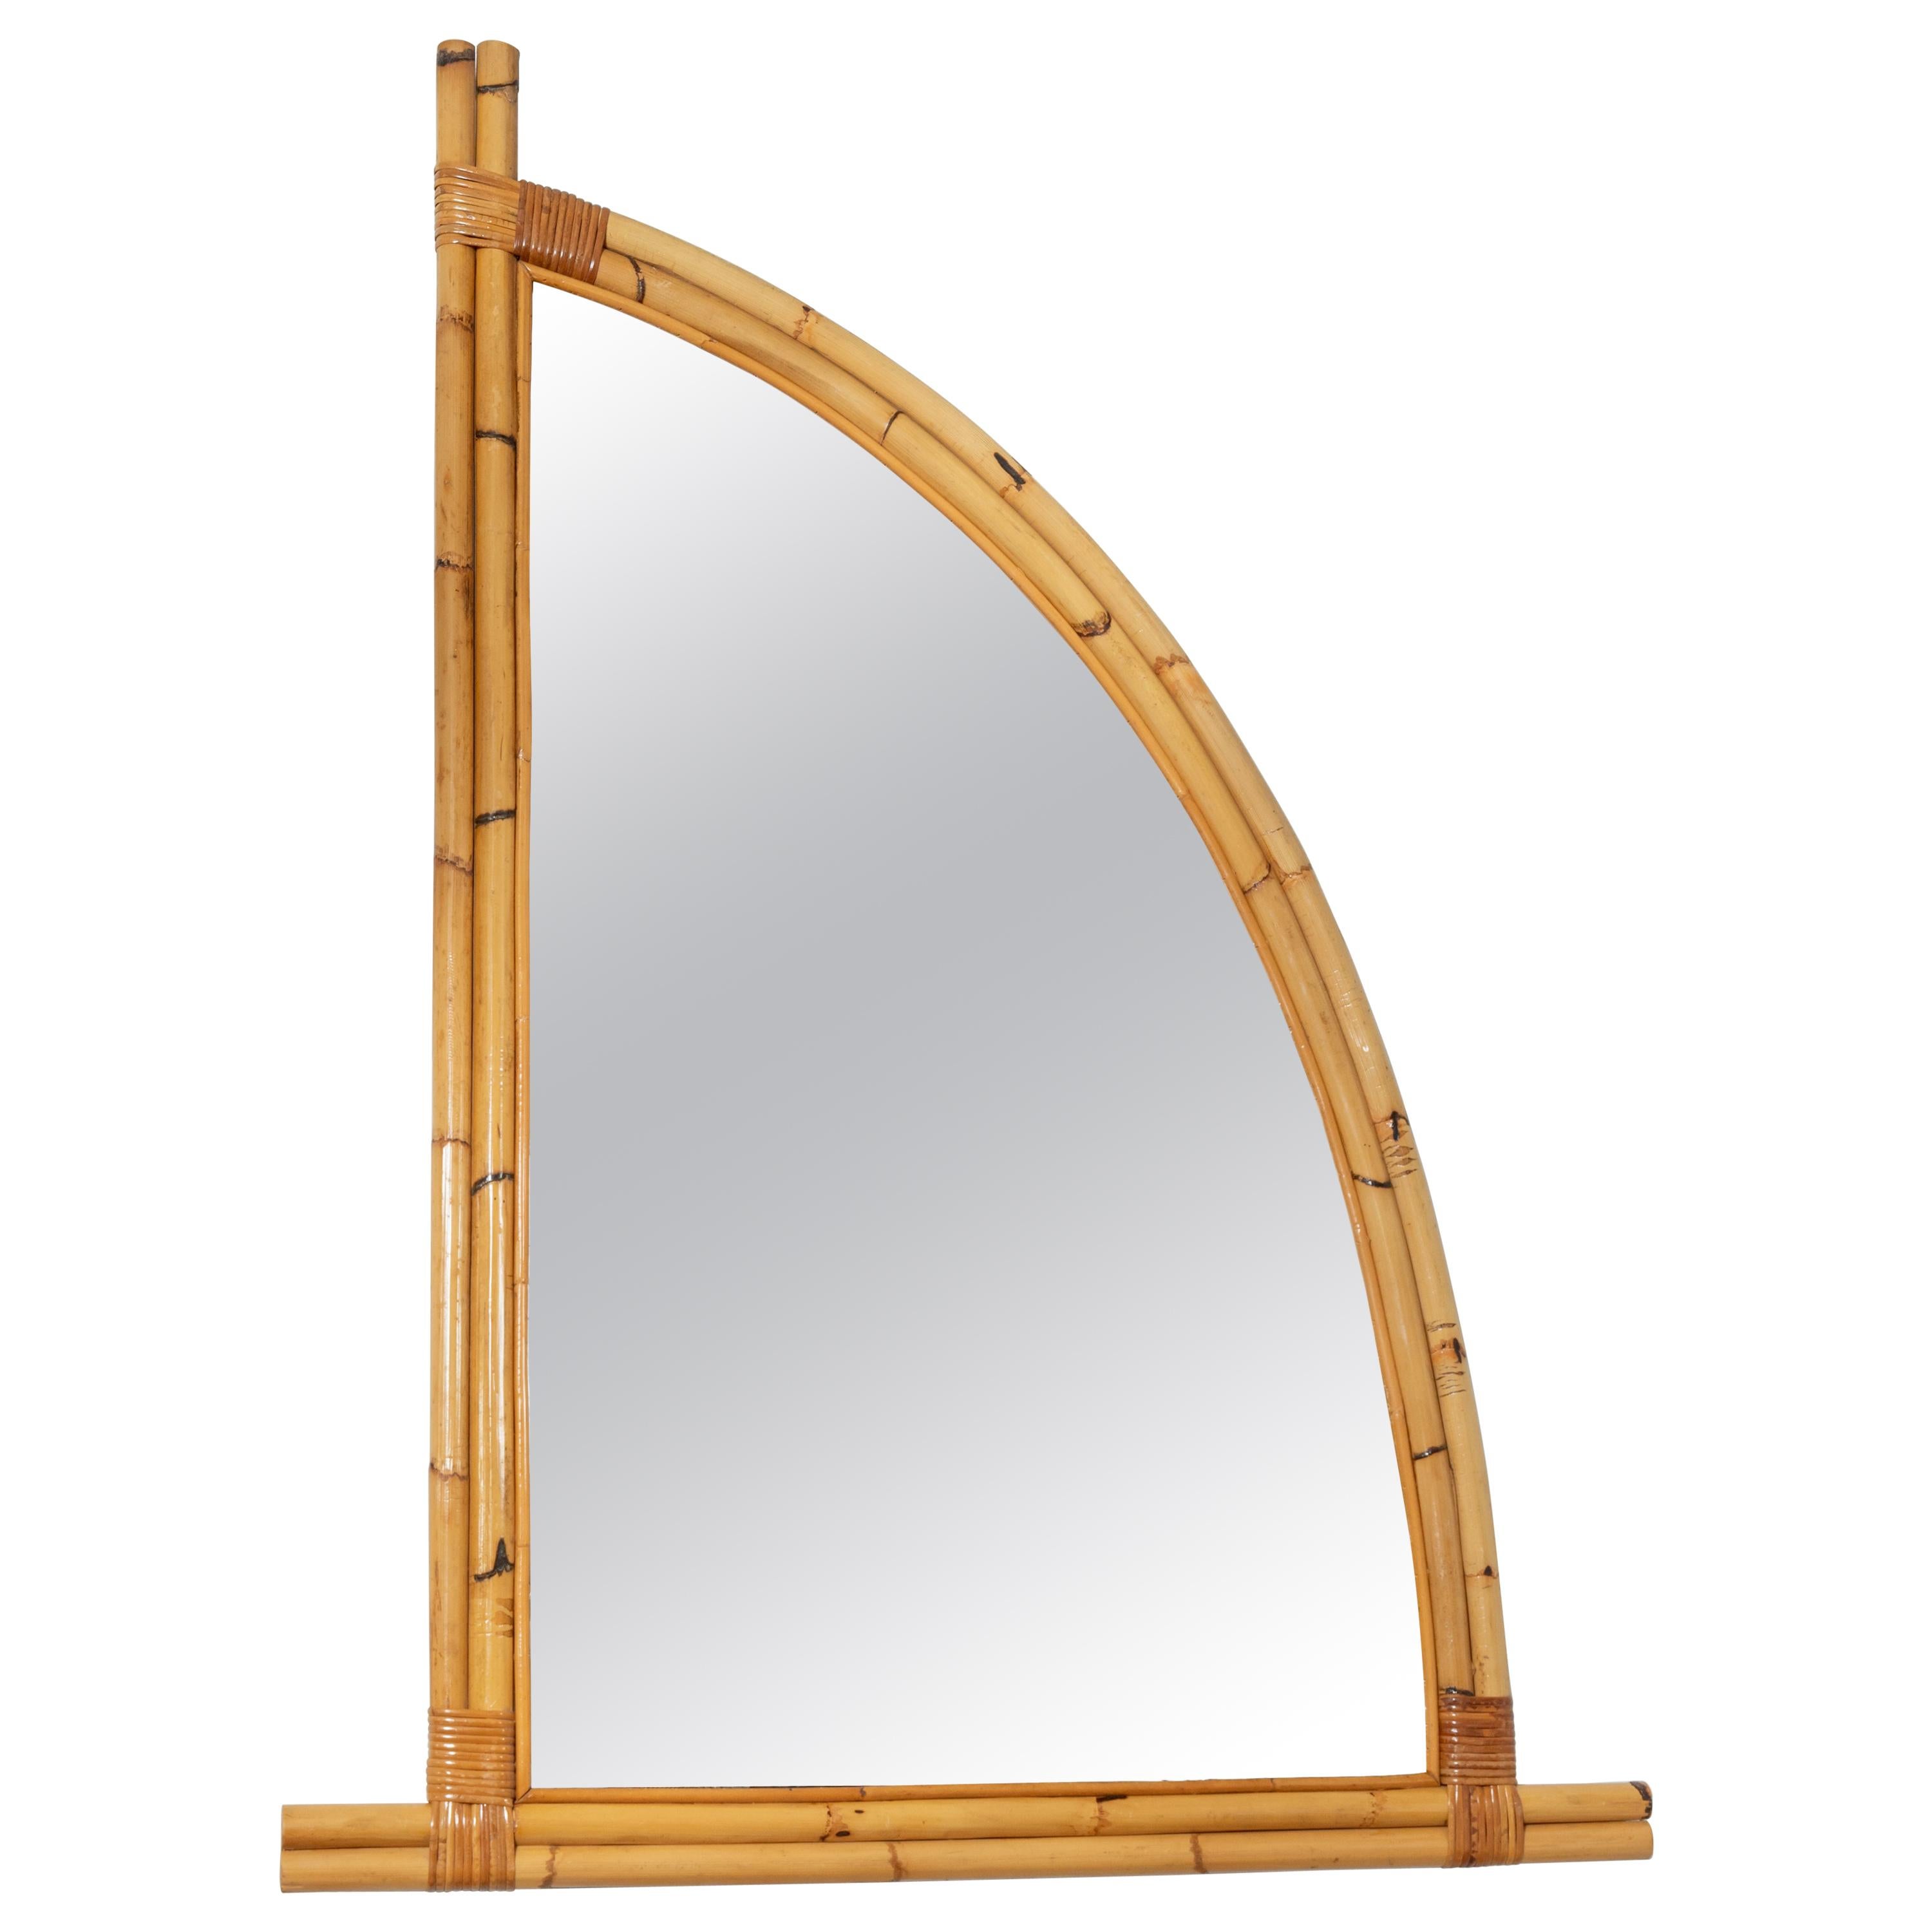 Unusual Shaped Bamboo Mirrors 'Left and Right Available, Right is Shown'